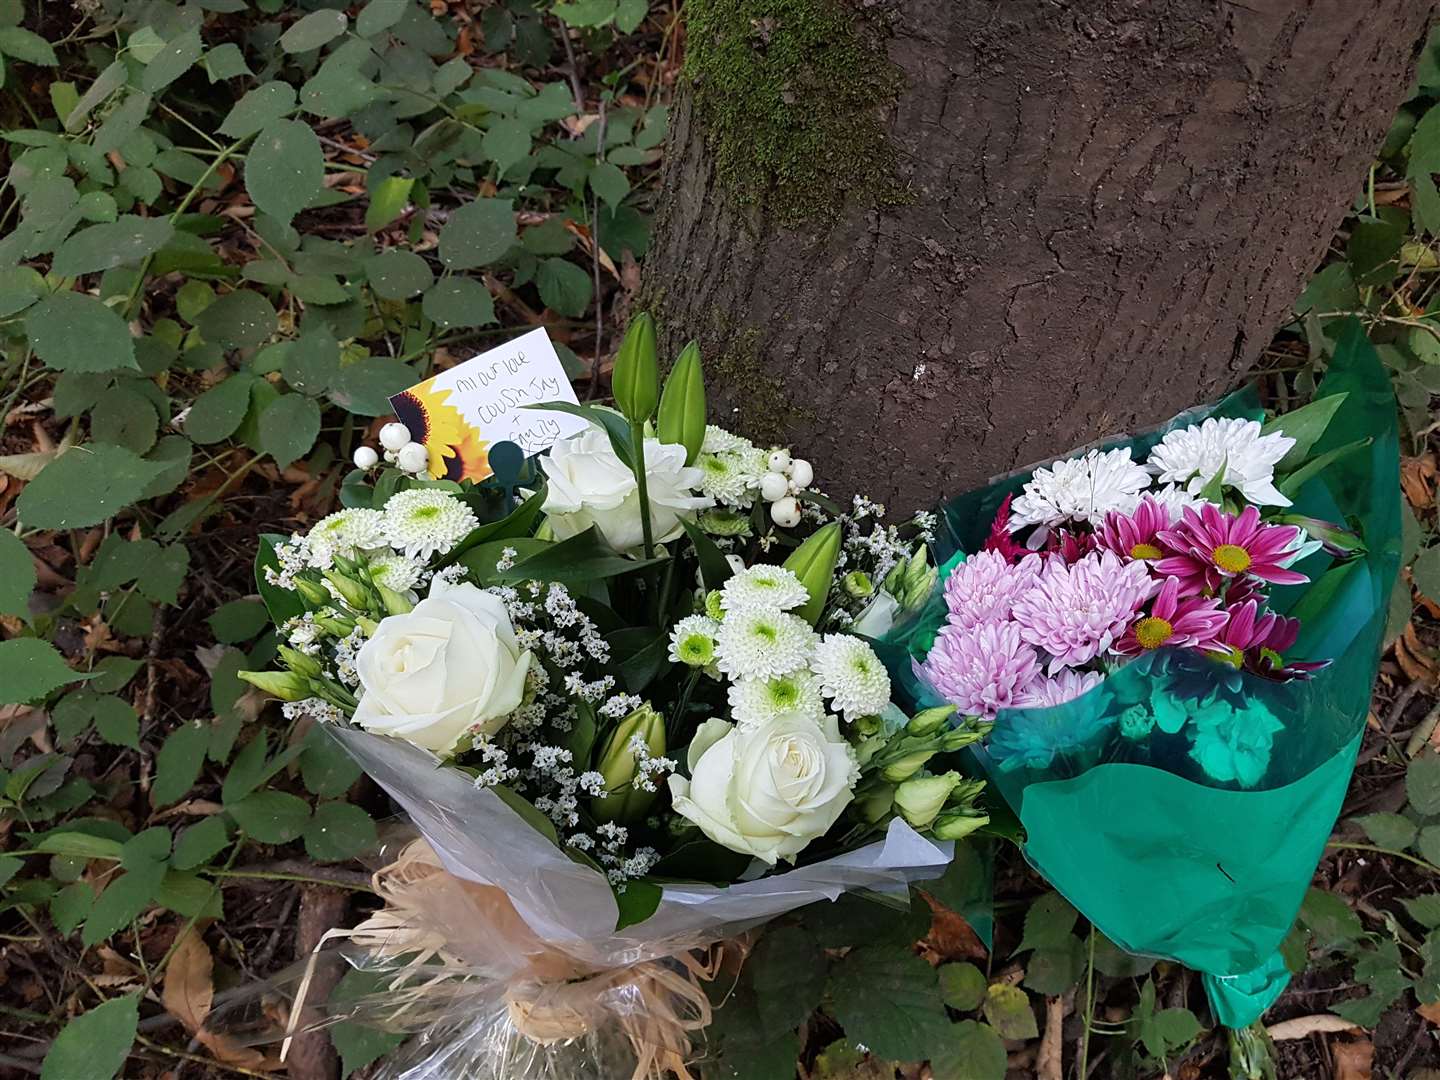 Floral tributes left at the scene of the crash in Kingswood